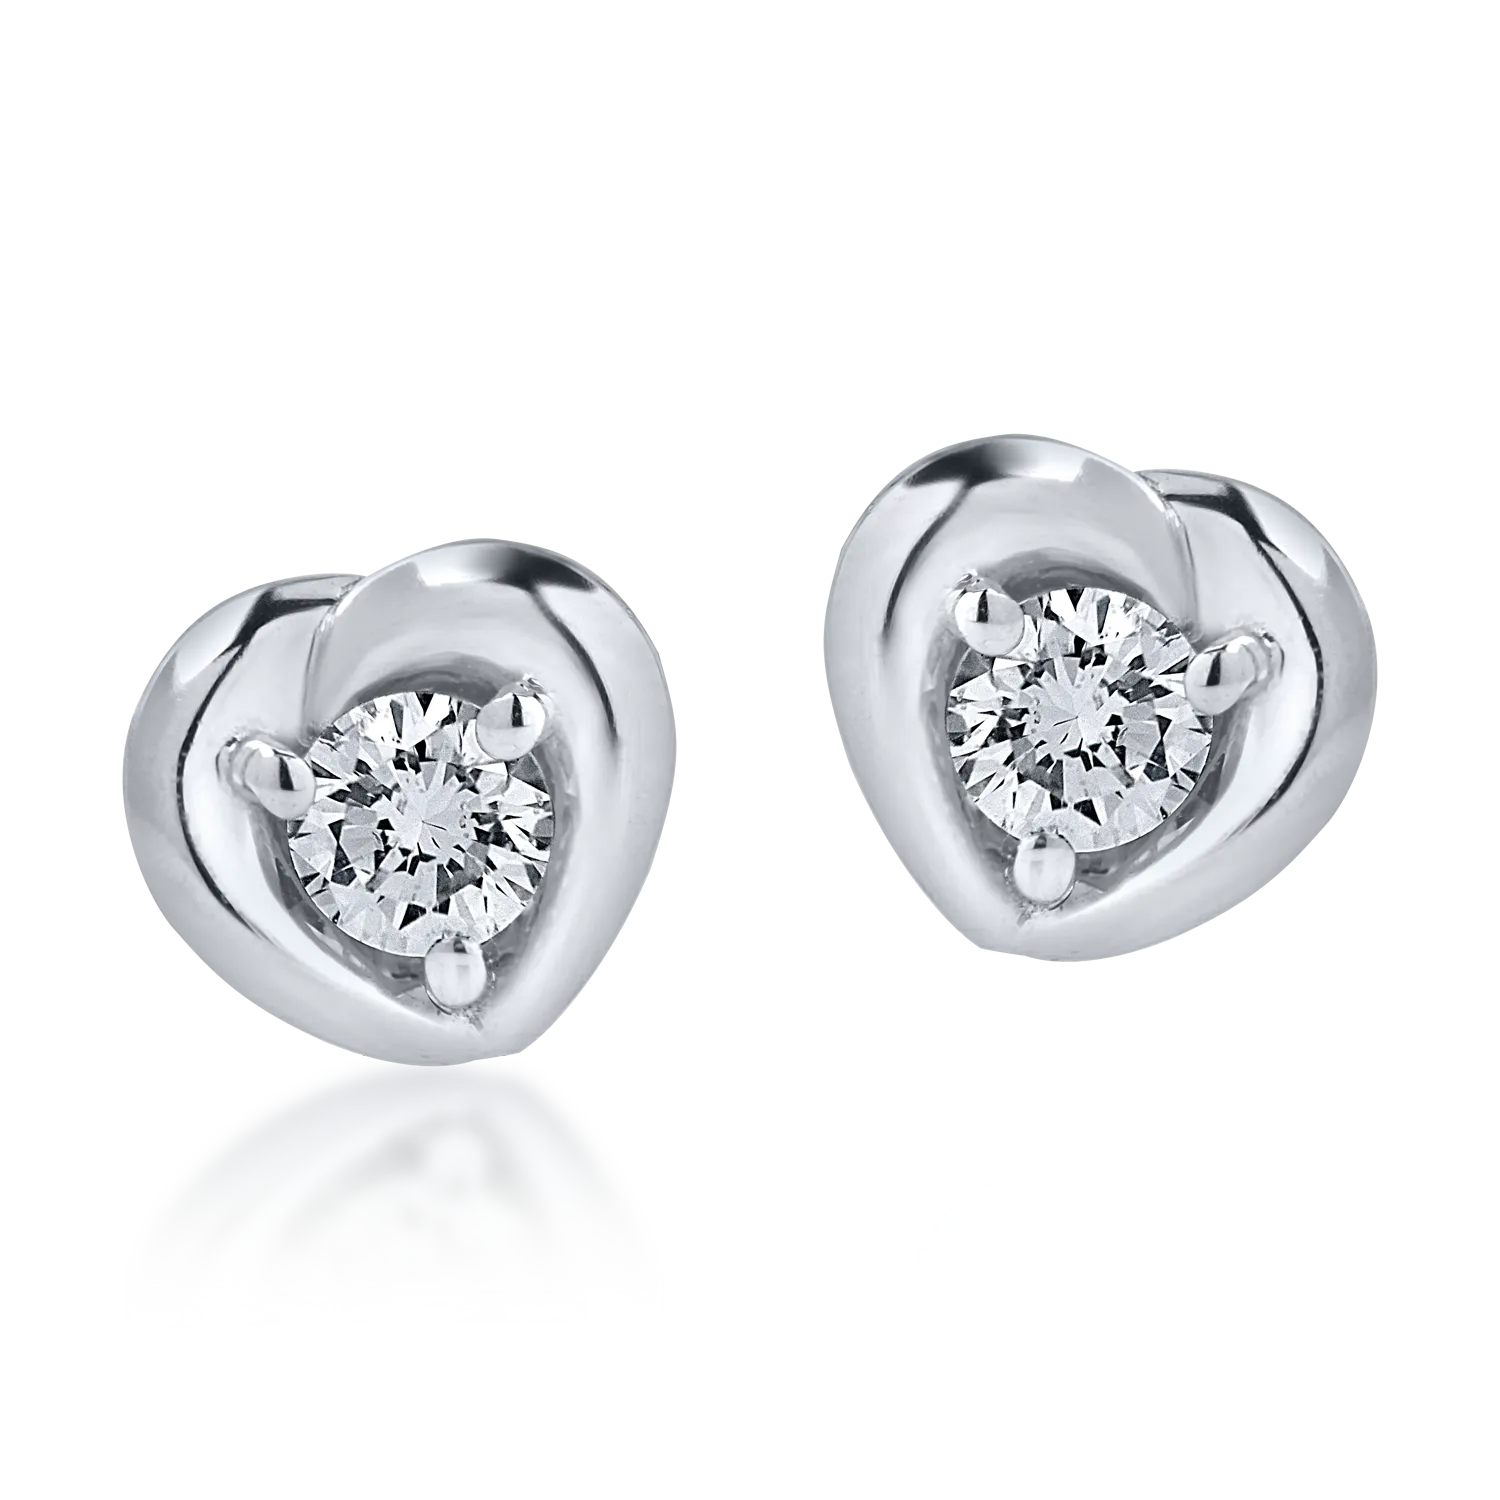 White gold earrings with 0.12ct diamonds